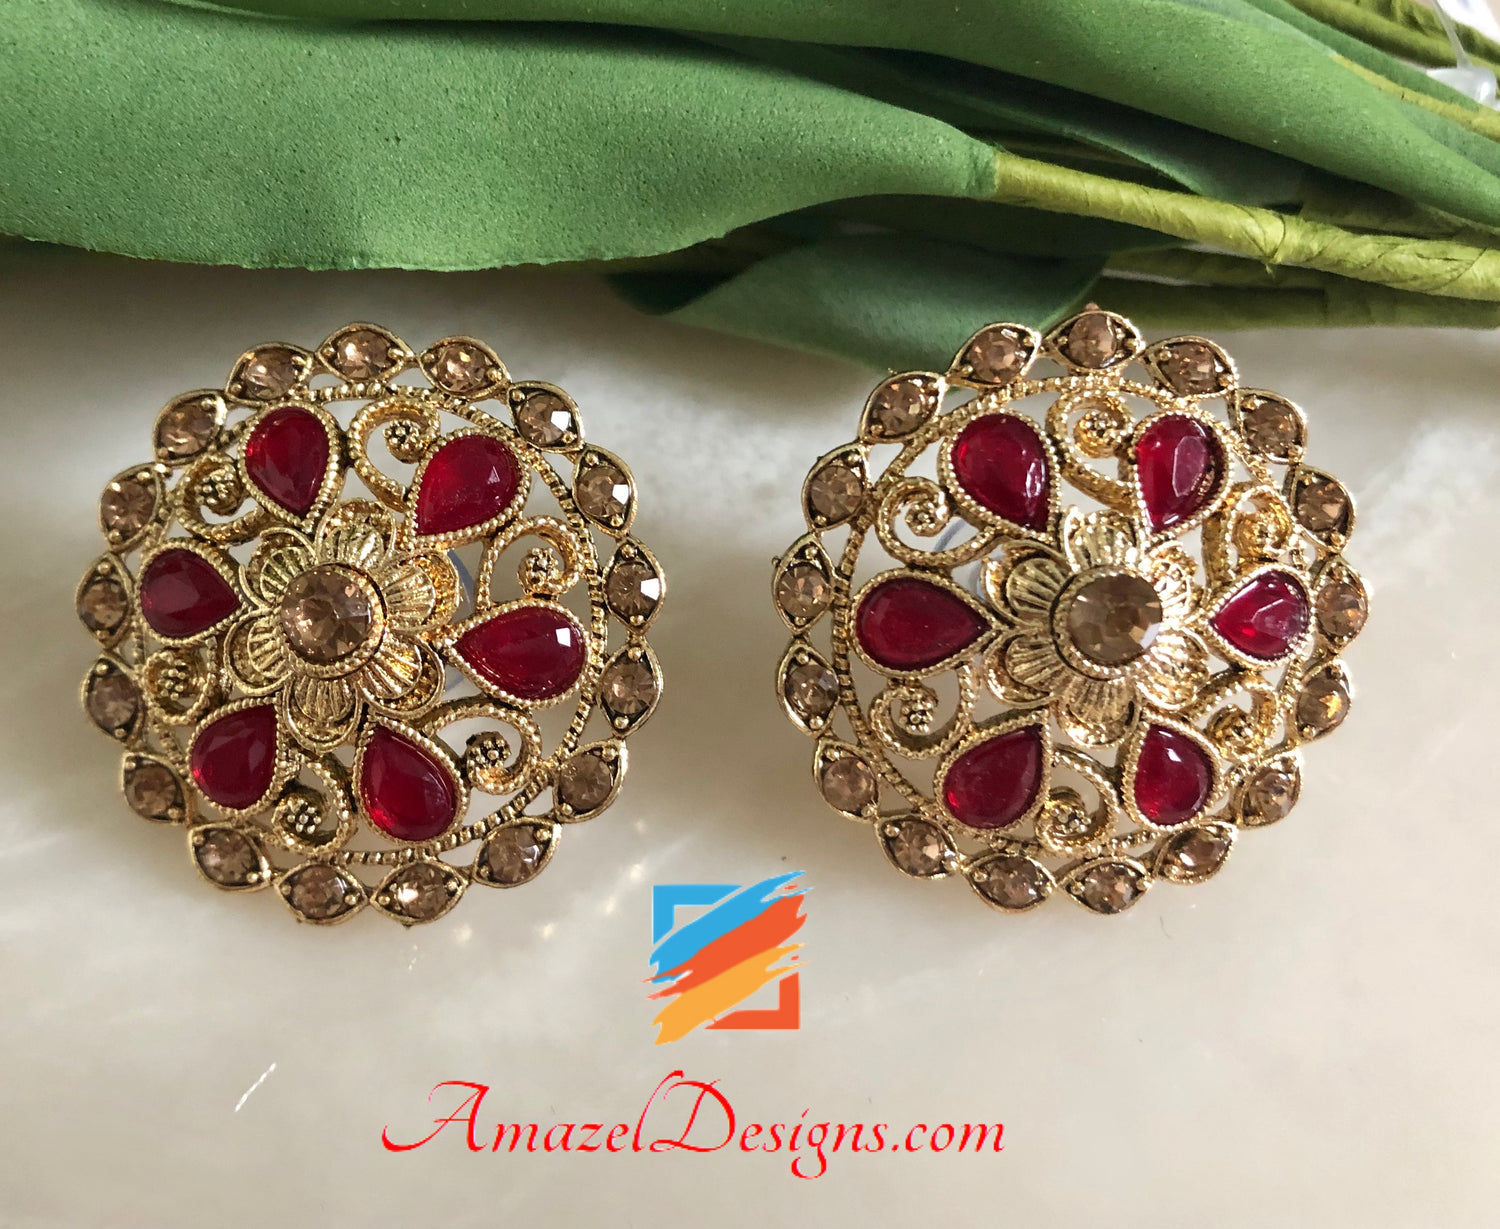 Buy Temple Fine Quality Choker Set.red &green Kemp Stone Work for Jadau  Look.affordable. Available in Bulk.eyecatching Ad Pendant.big Earrings.  Online in India … | Unique wedding jewelry, Floral pendant, Pendant set